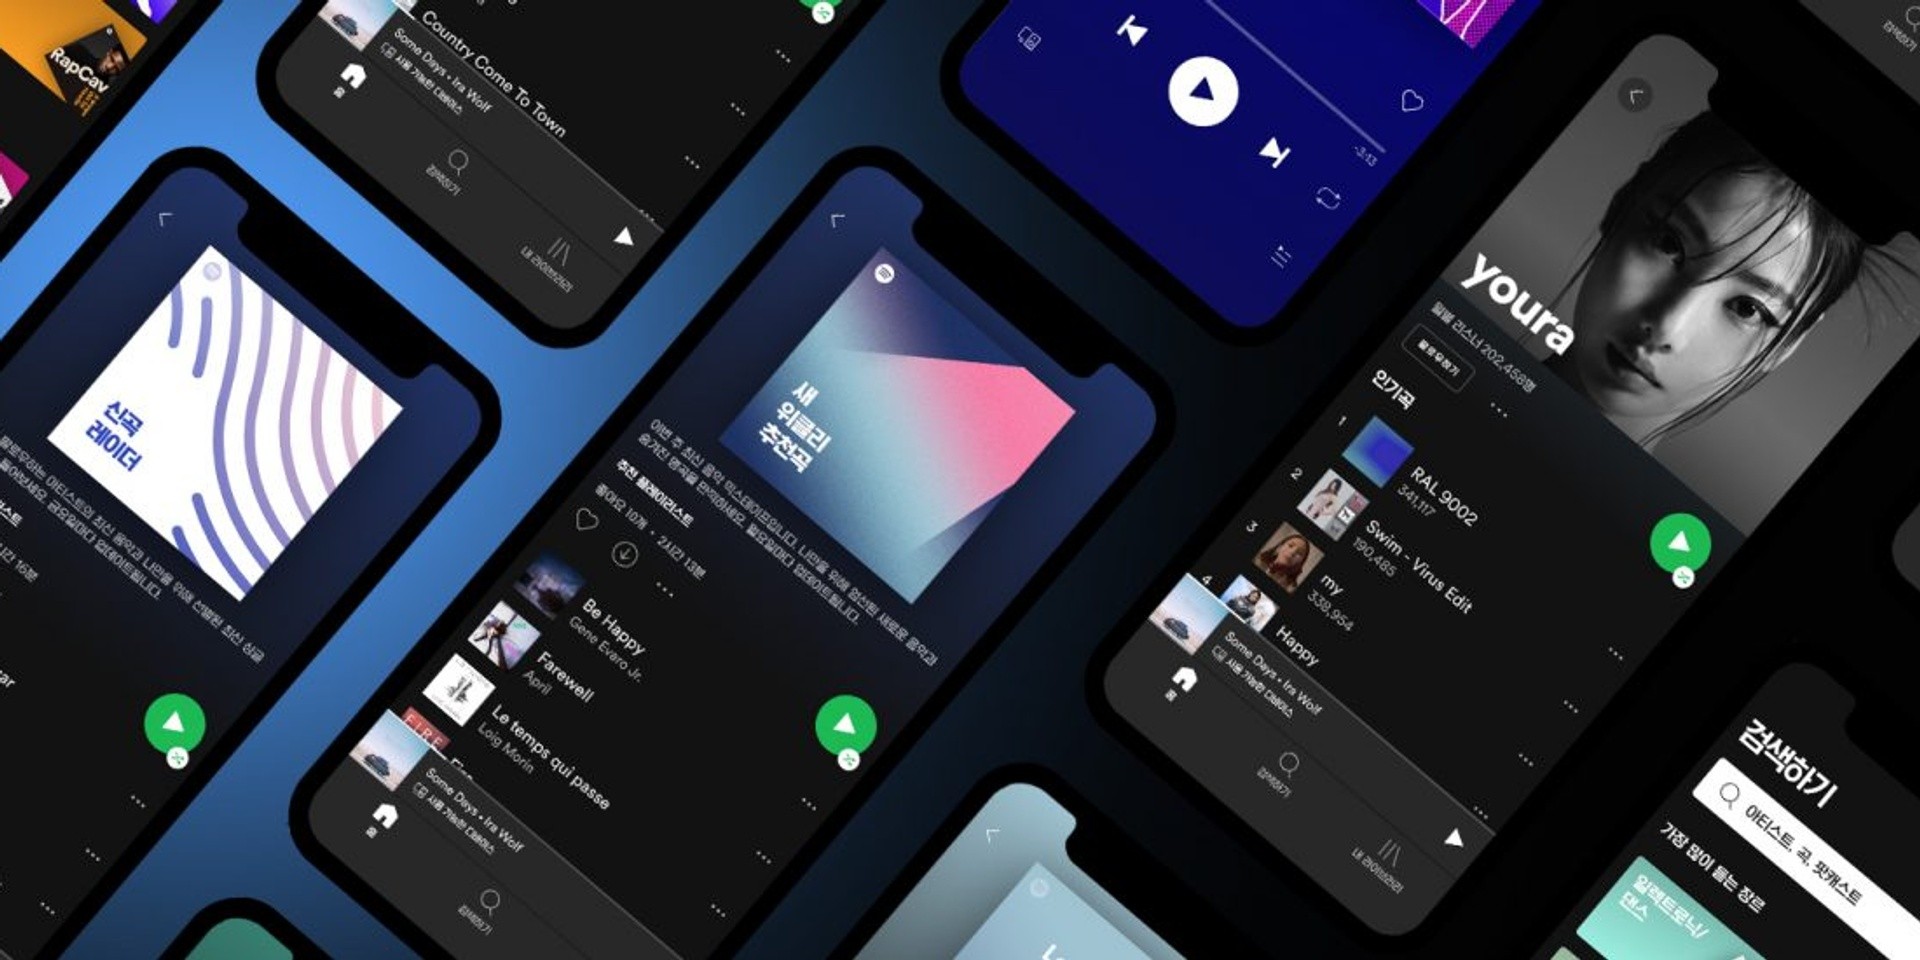 Spotify is finally available in South Korea